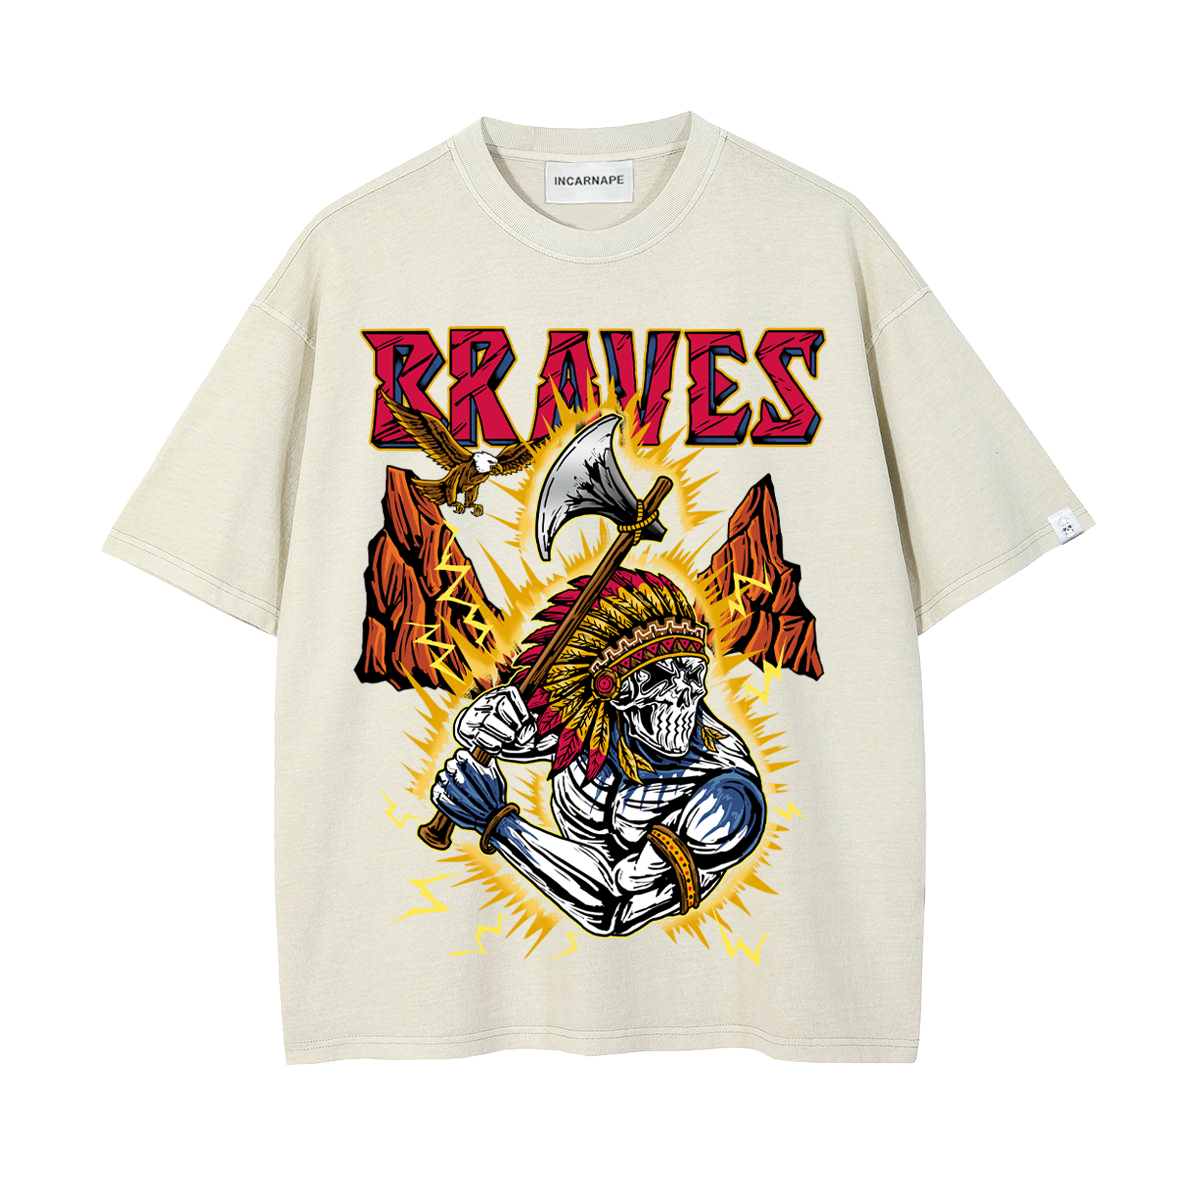 INCARNAPE BRAVES "FOR THE A" PREMIUM TEE